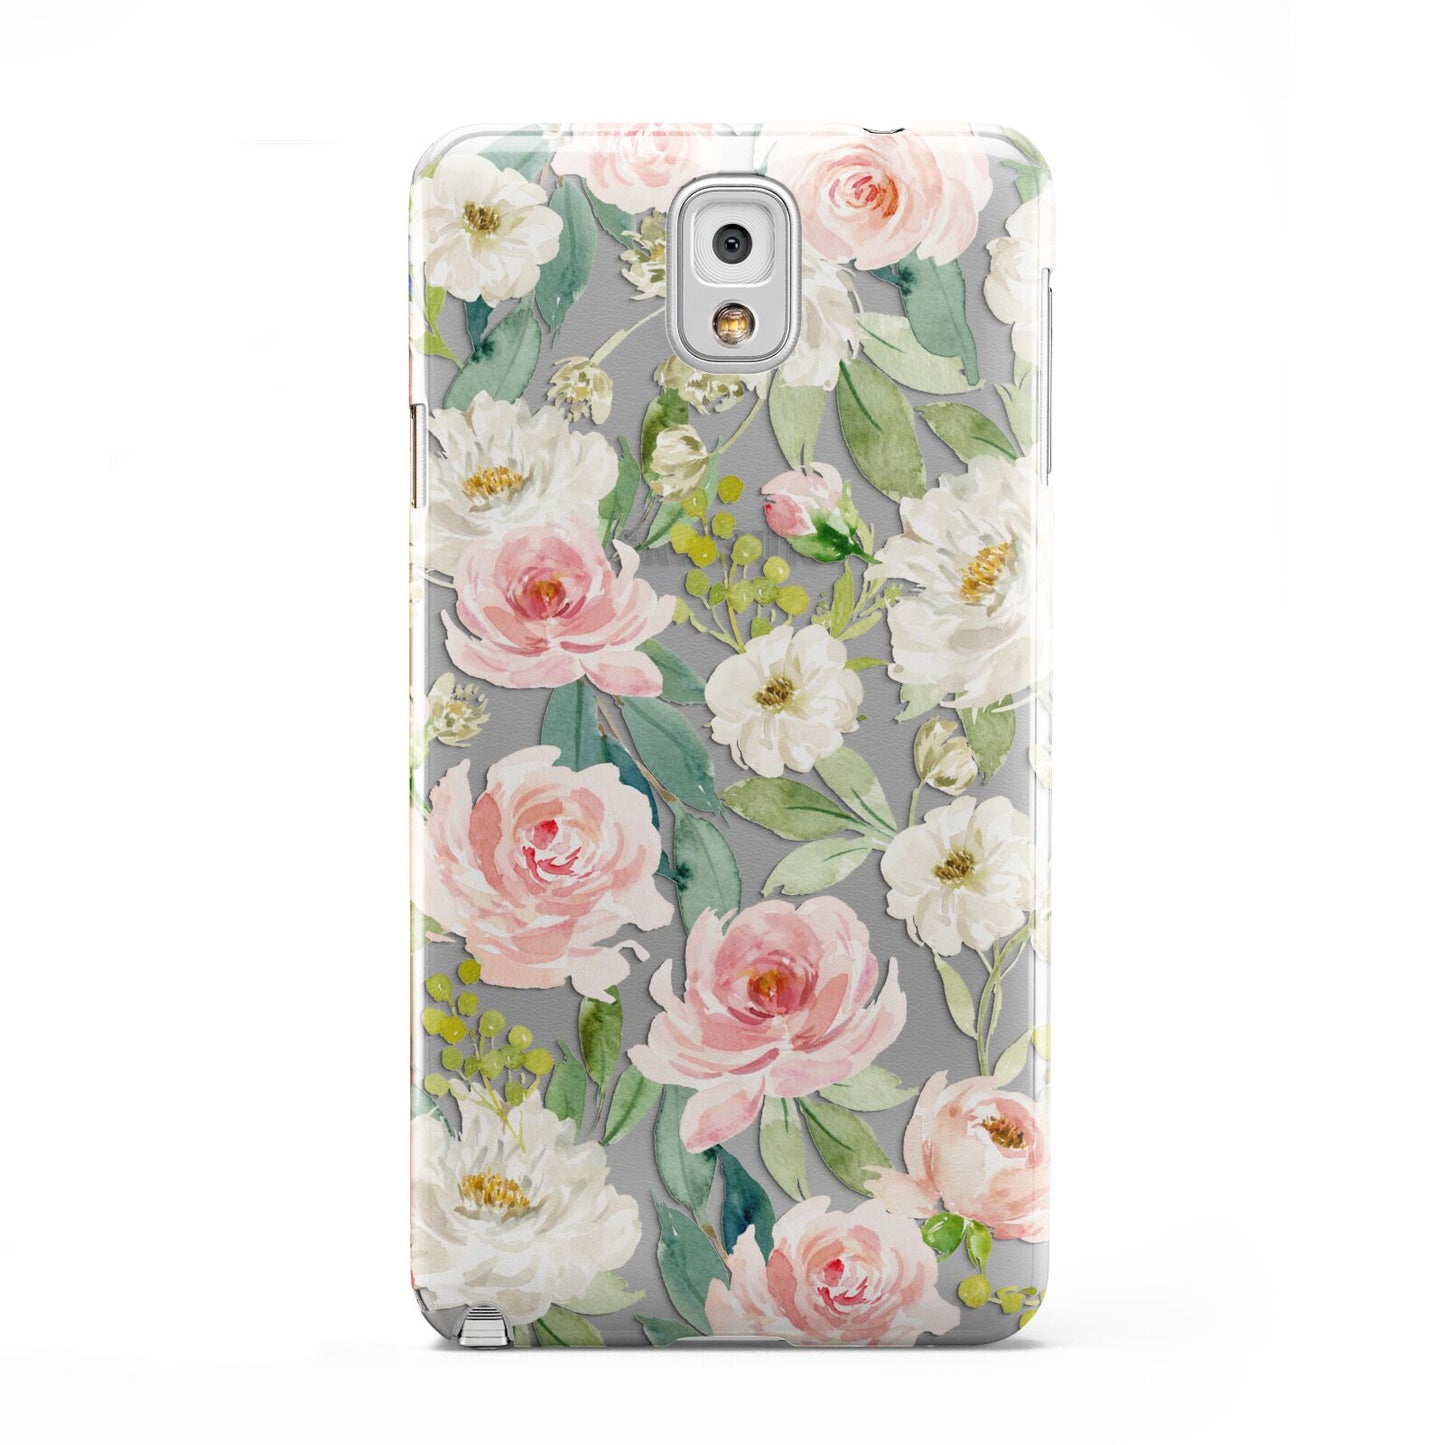 Watercolour Peonies Roses and Foliage Samsung Galaxy Note 3 Case